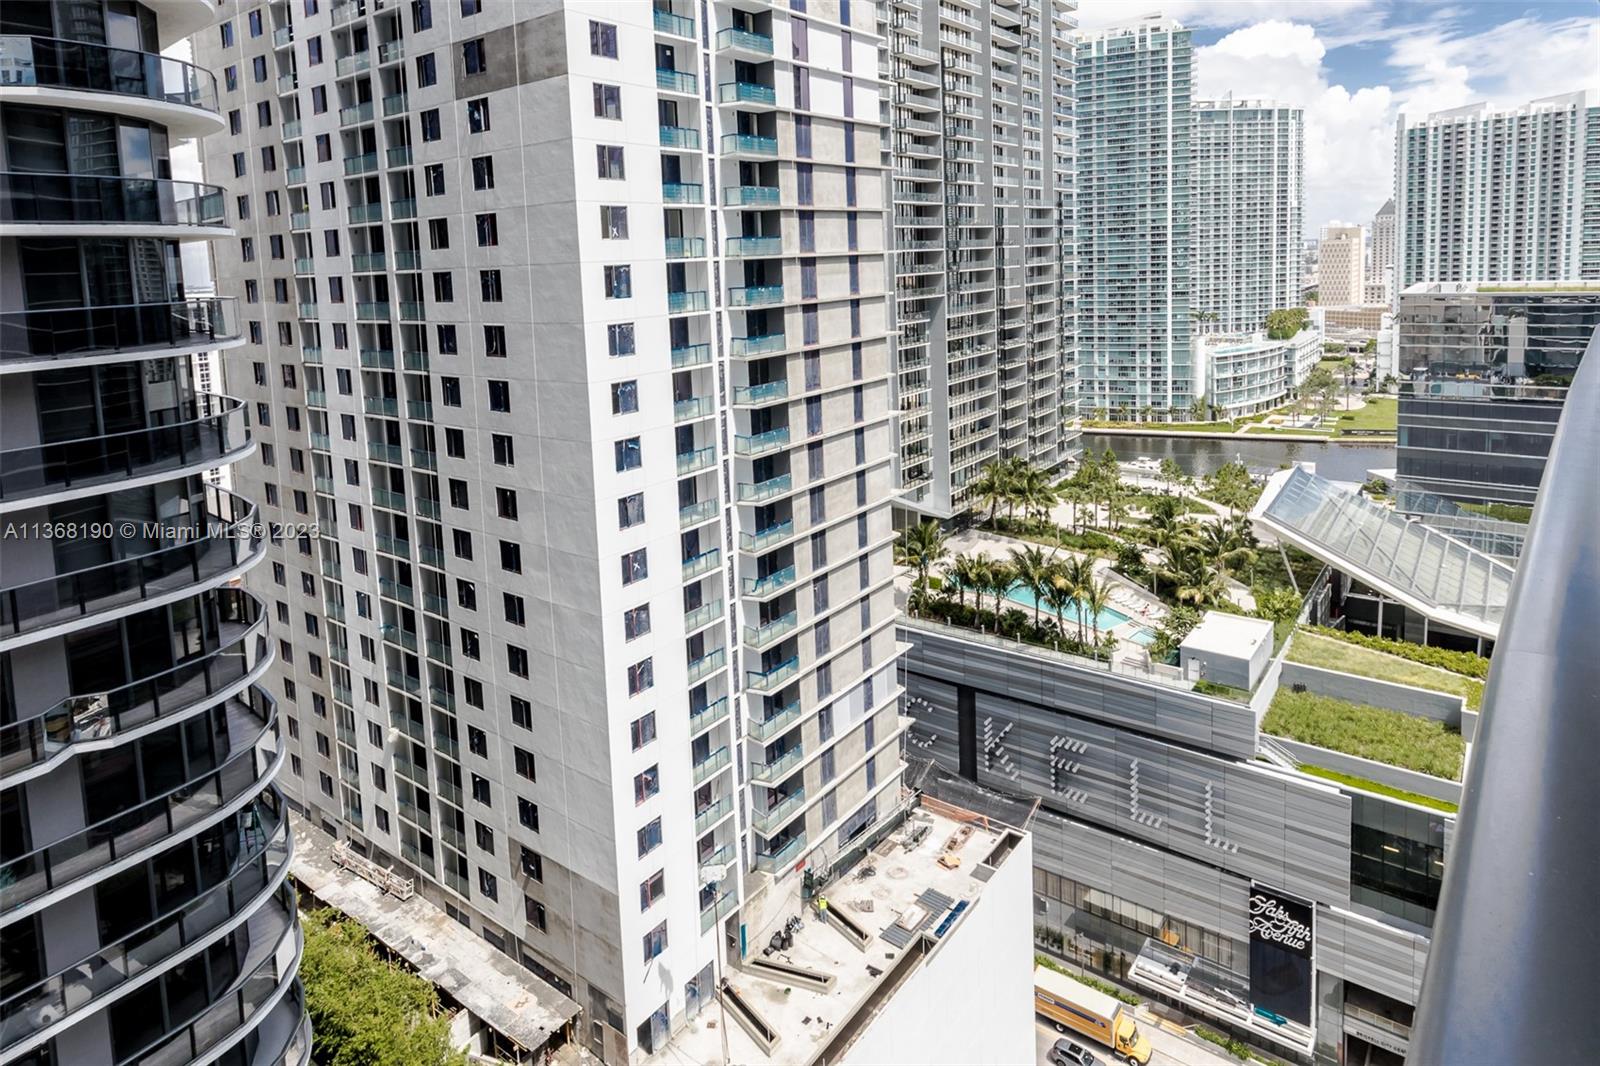 Brickell Heights East Tower image #16